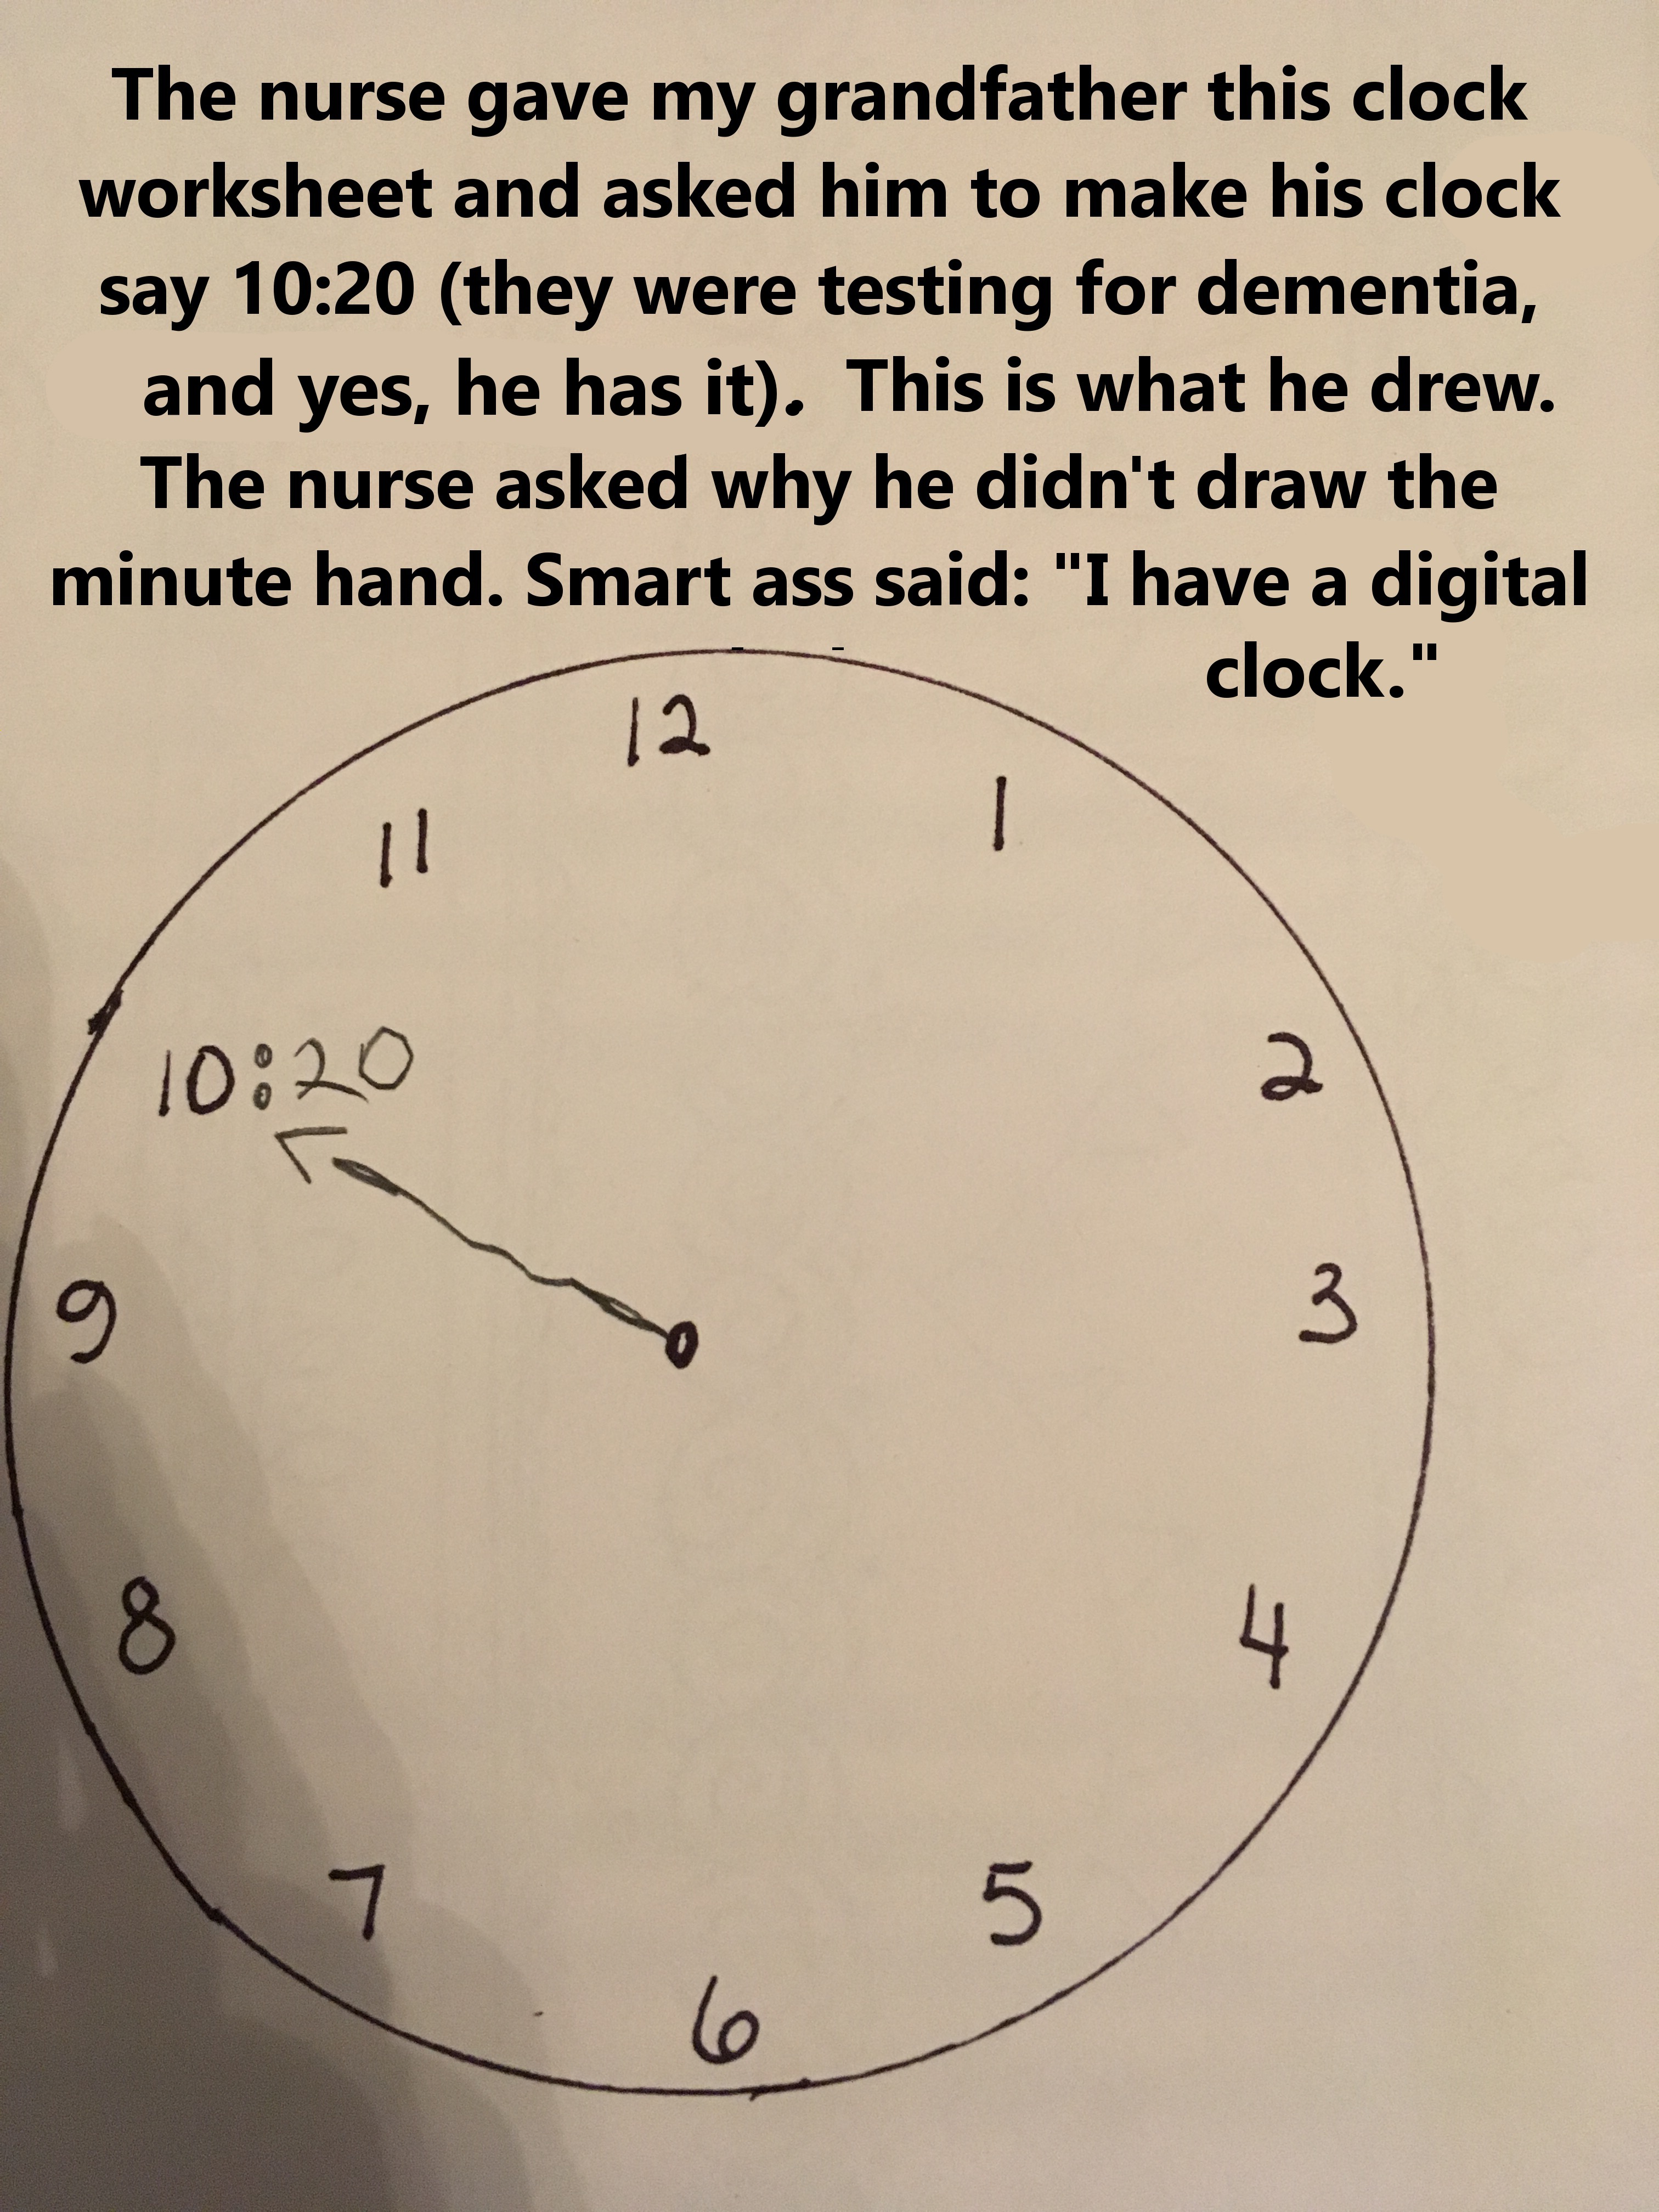 clock - The nurse gave my grandfather this clock worksheet and asked him to make his clock say they were testing for dementia, and yes, he has it. This is what he drew. The nurse asked why he didn't draw the minute hand. Smart ass said "I have a digital c